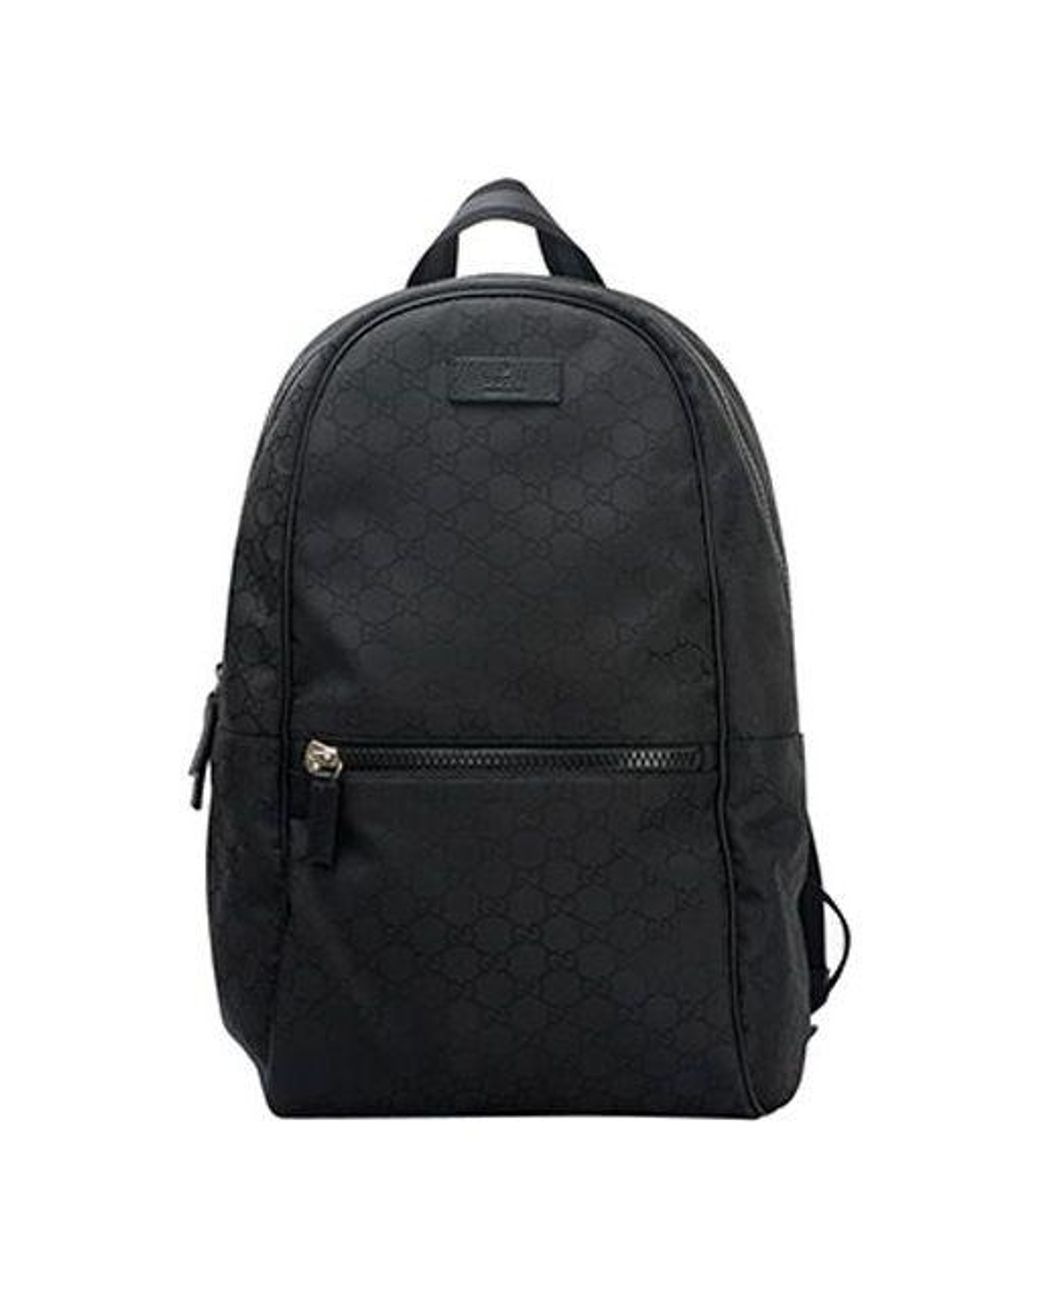 Gucci Logo Leather Logo Nylon Large Capacity Schoolbag Backpack in